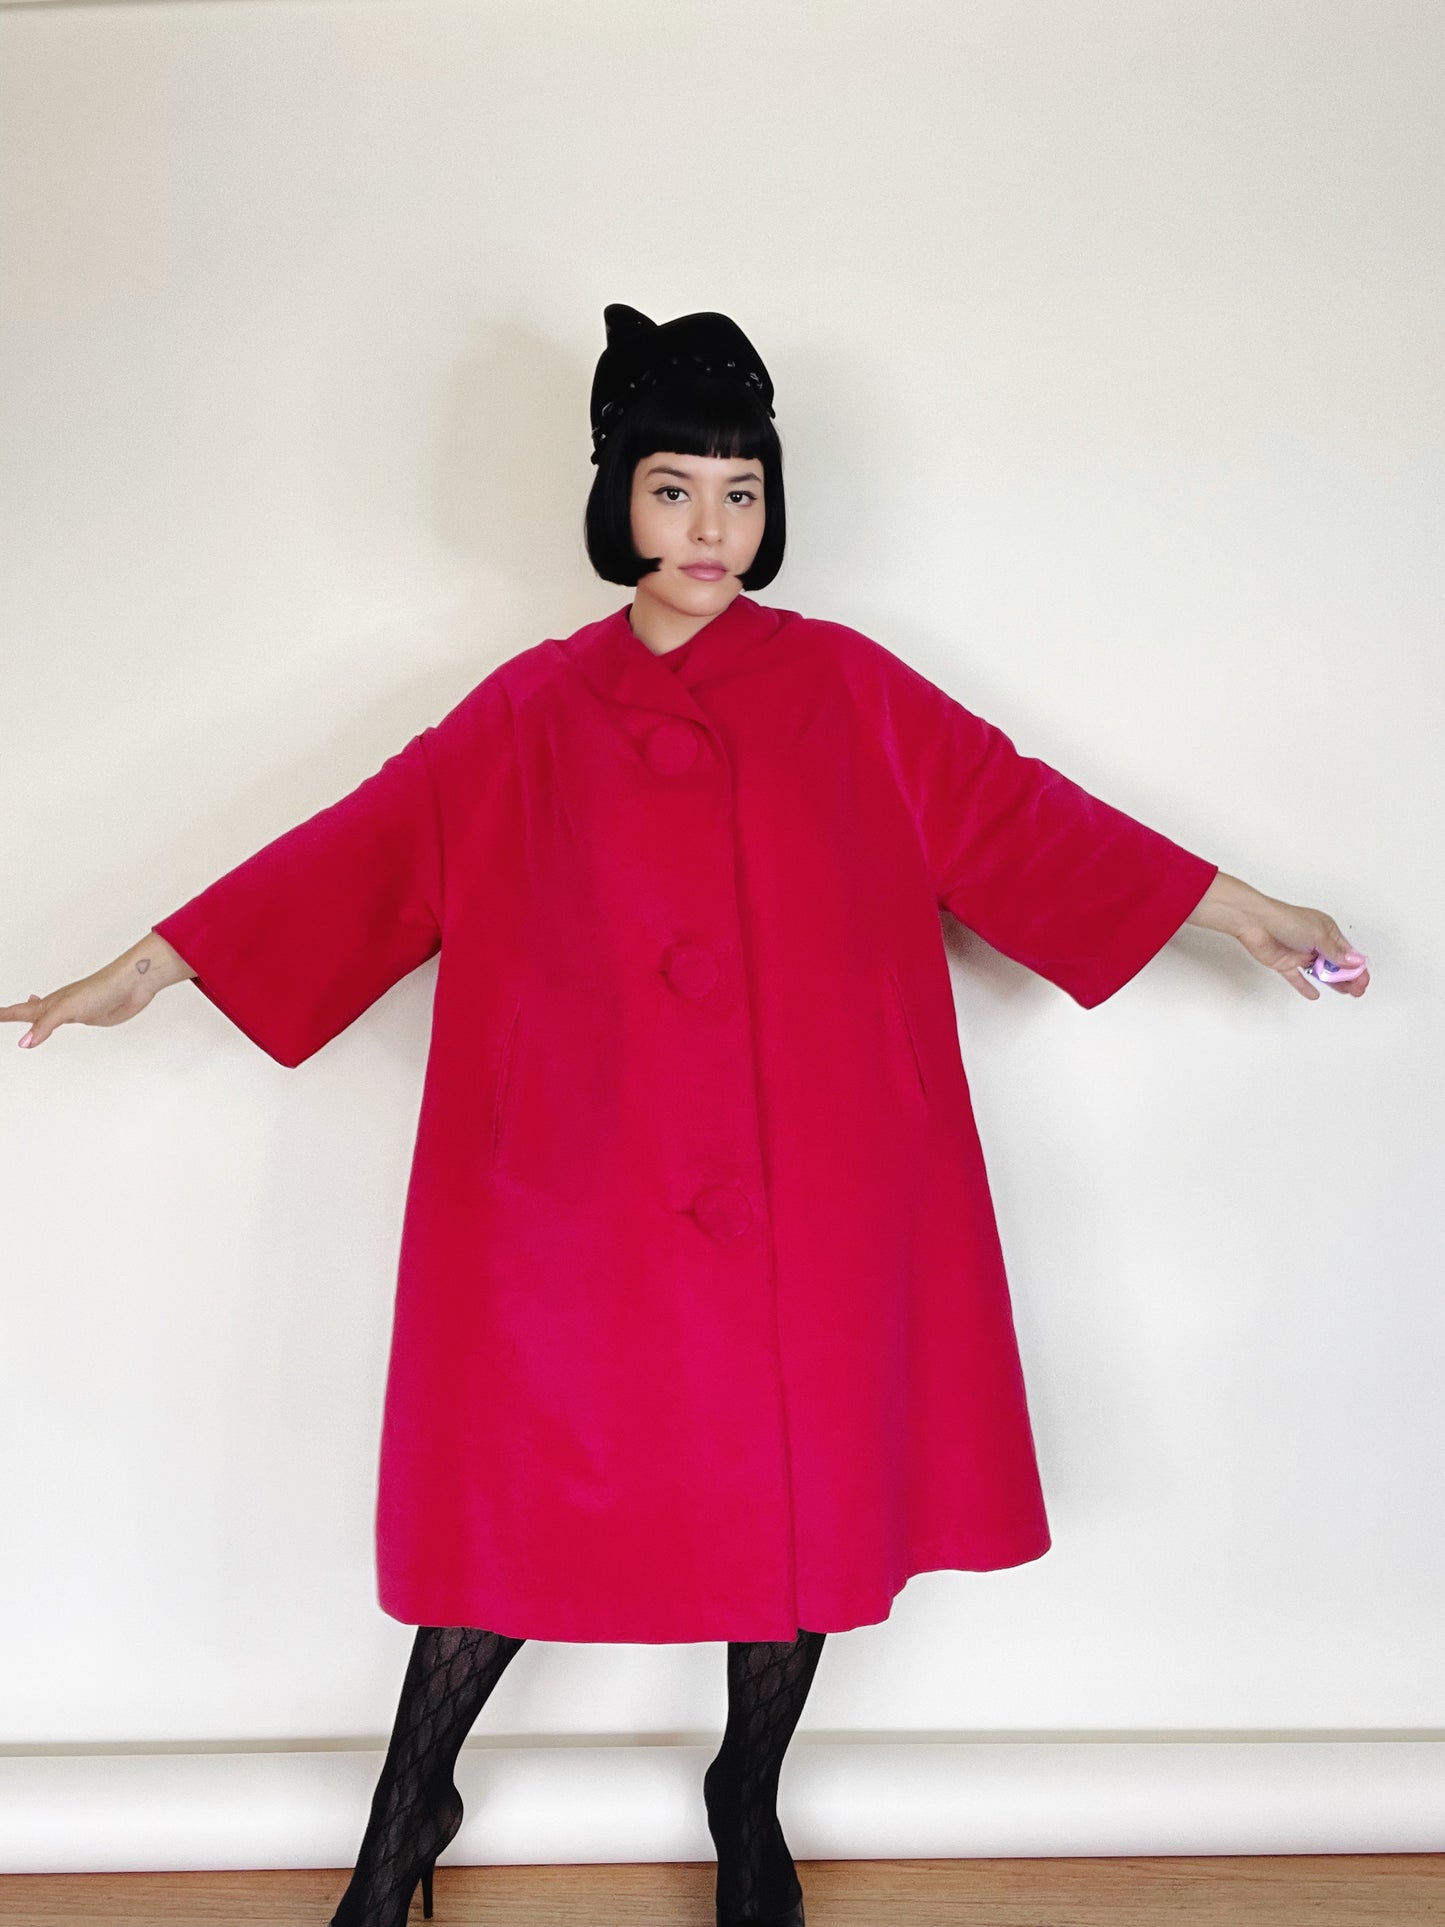 Vintage 50s/60s Hot Pink Velvet Marguerite Rubel San Francisco Swing Coat fits sizes XS-L. Made by Marguerite Rubel San Francisco